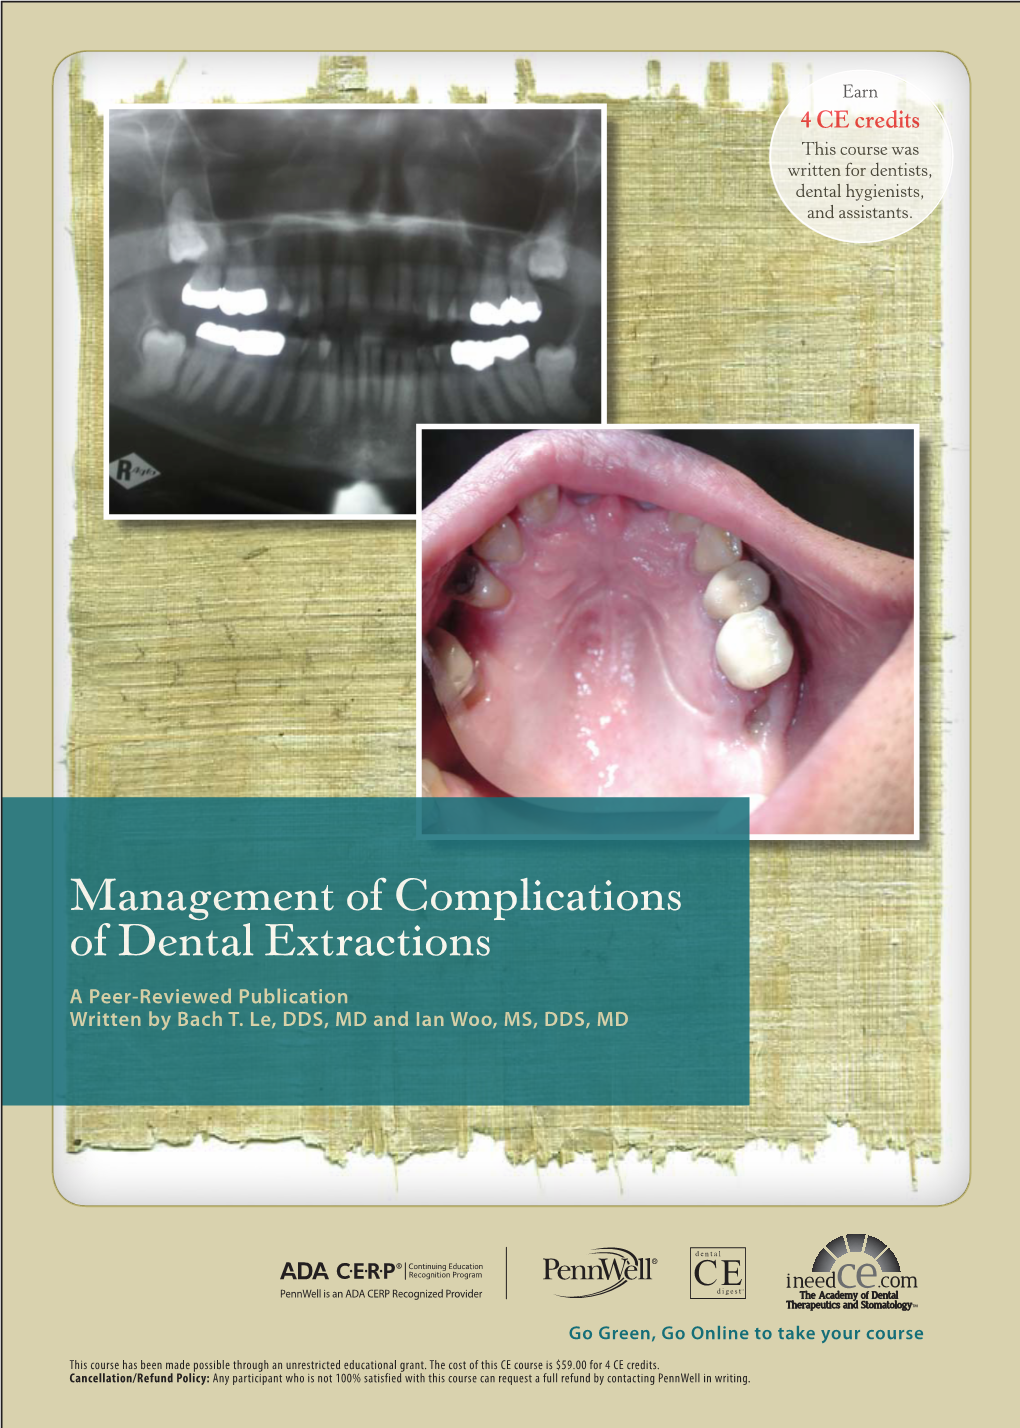 Management of Complications of Dental Extractions a Peer-Reviewed Publication Written by Bach T